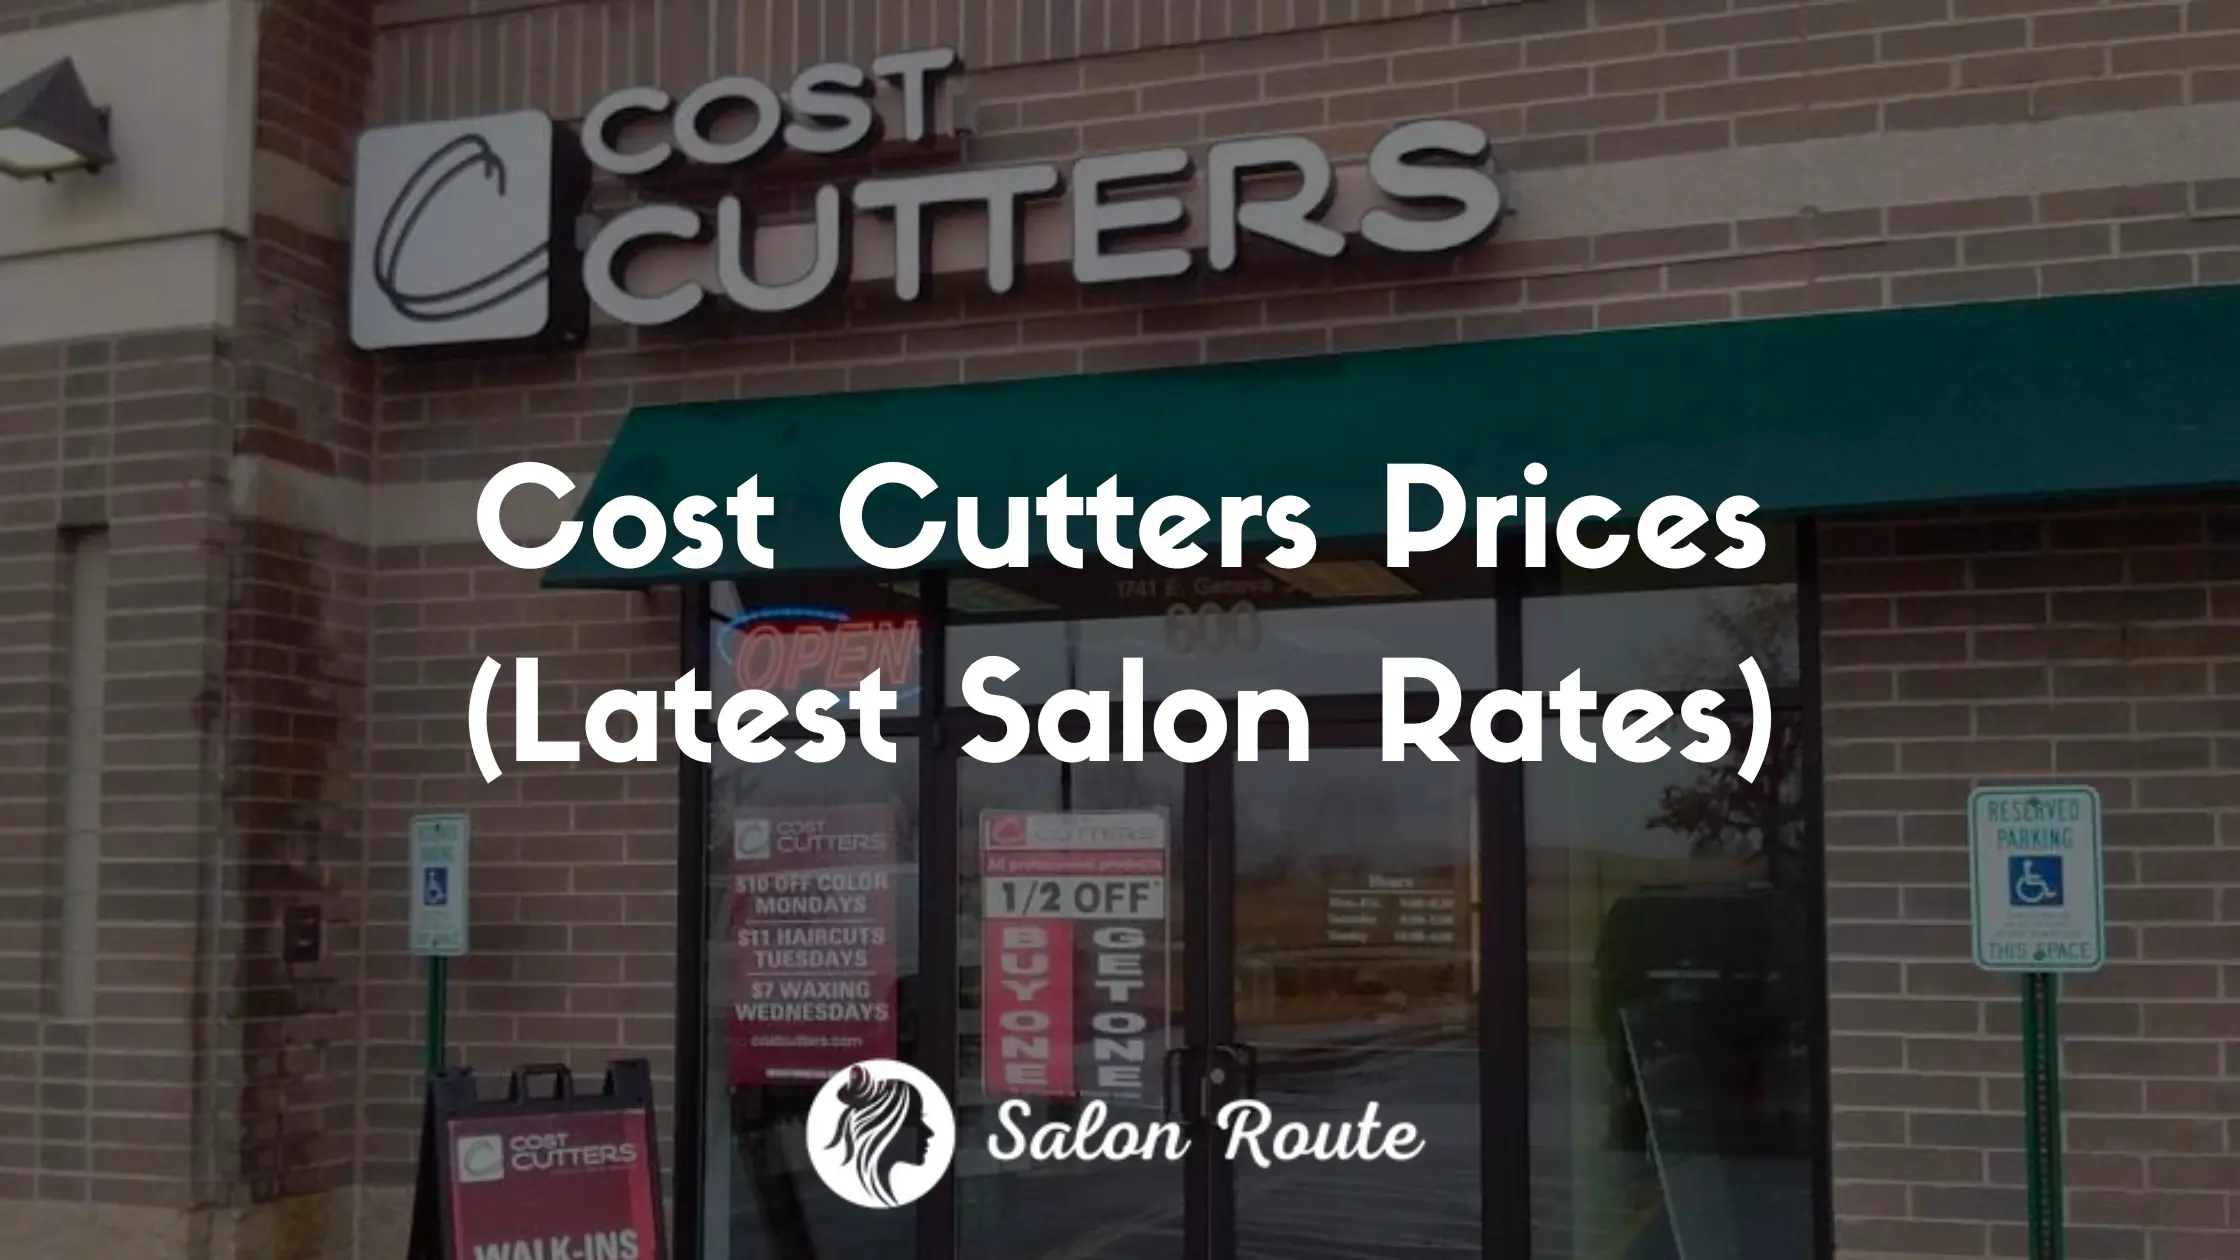 Cost Cutters Prices (Latest Salon Rates)